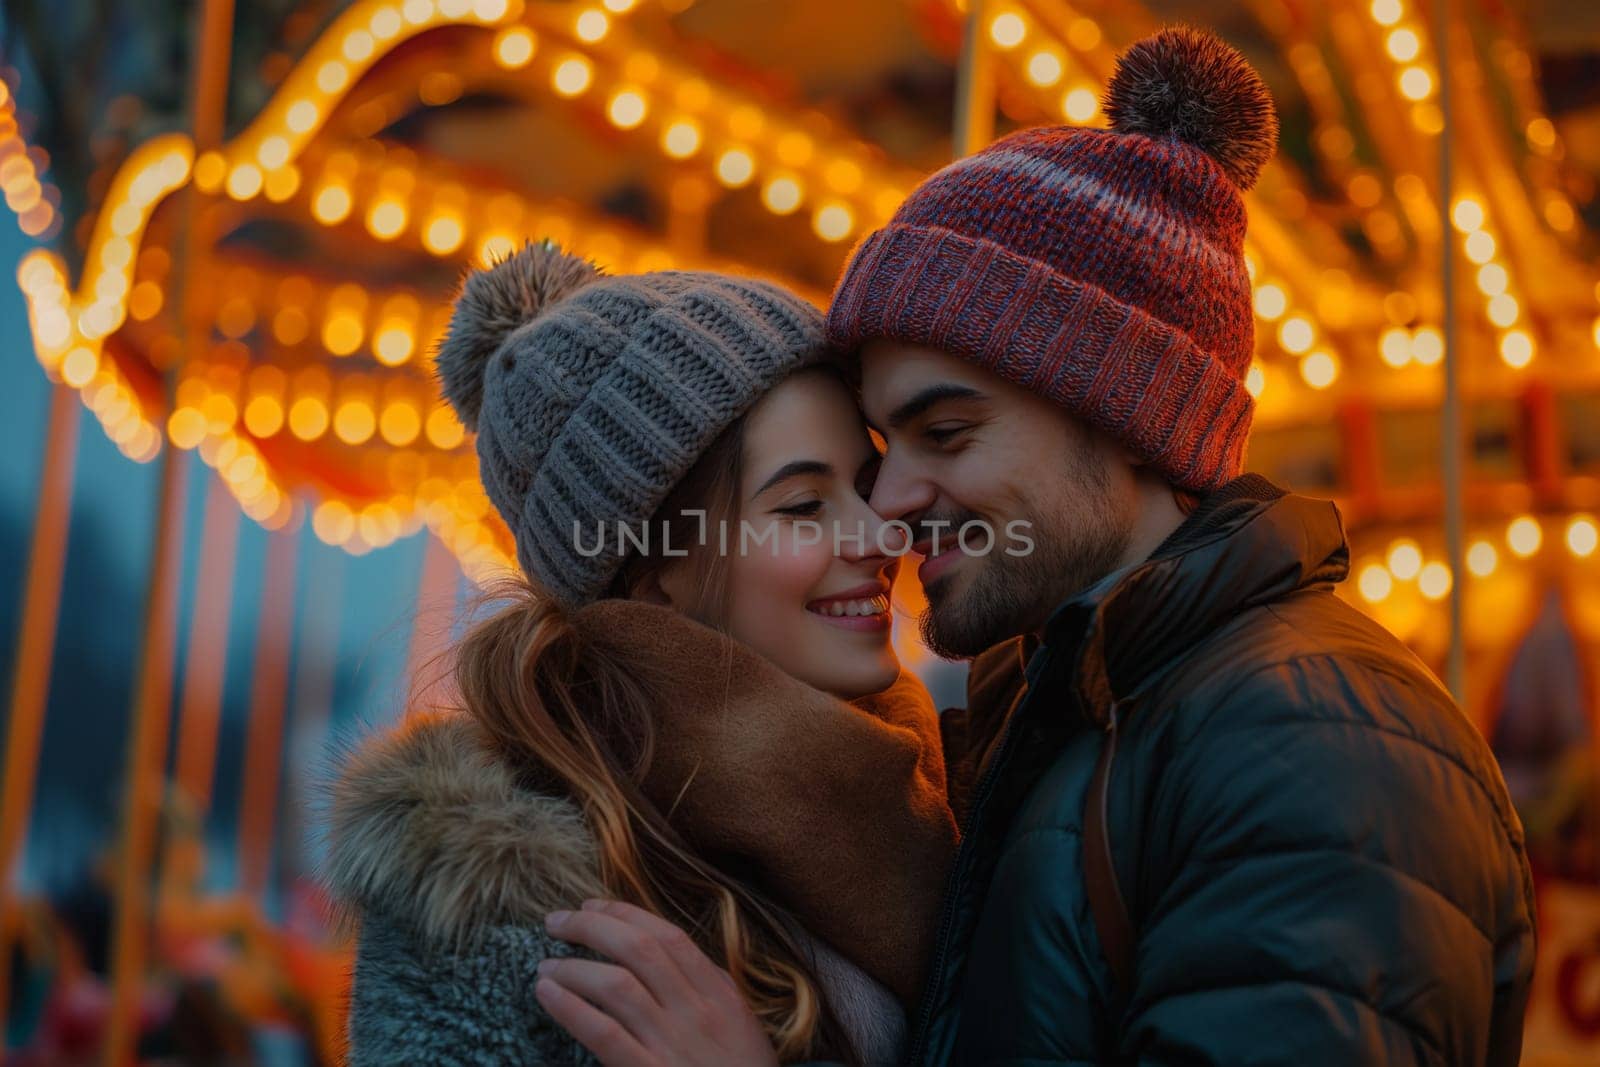 Affectionate young tourist couple at an illuminated carousel in the city at dusk by Sd28DimoN_1976